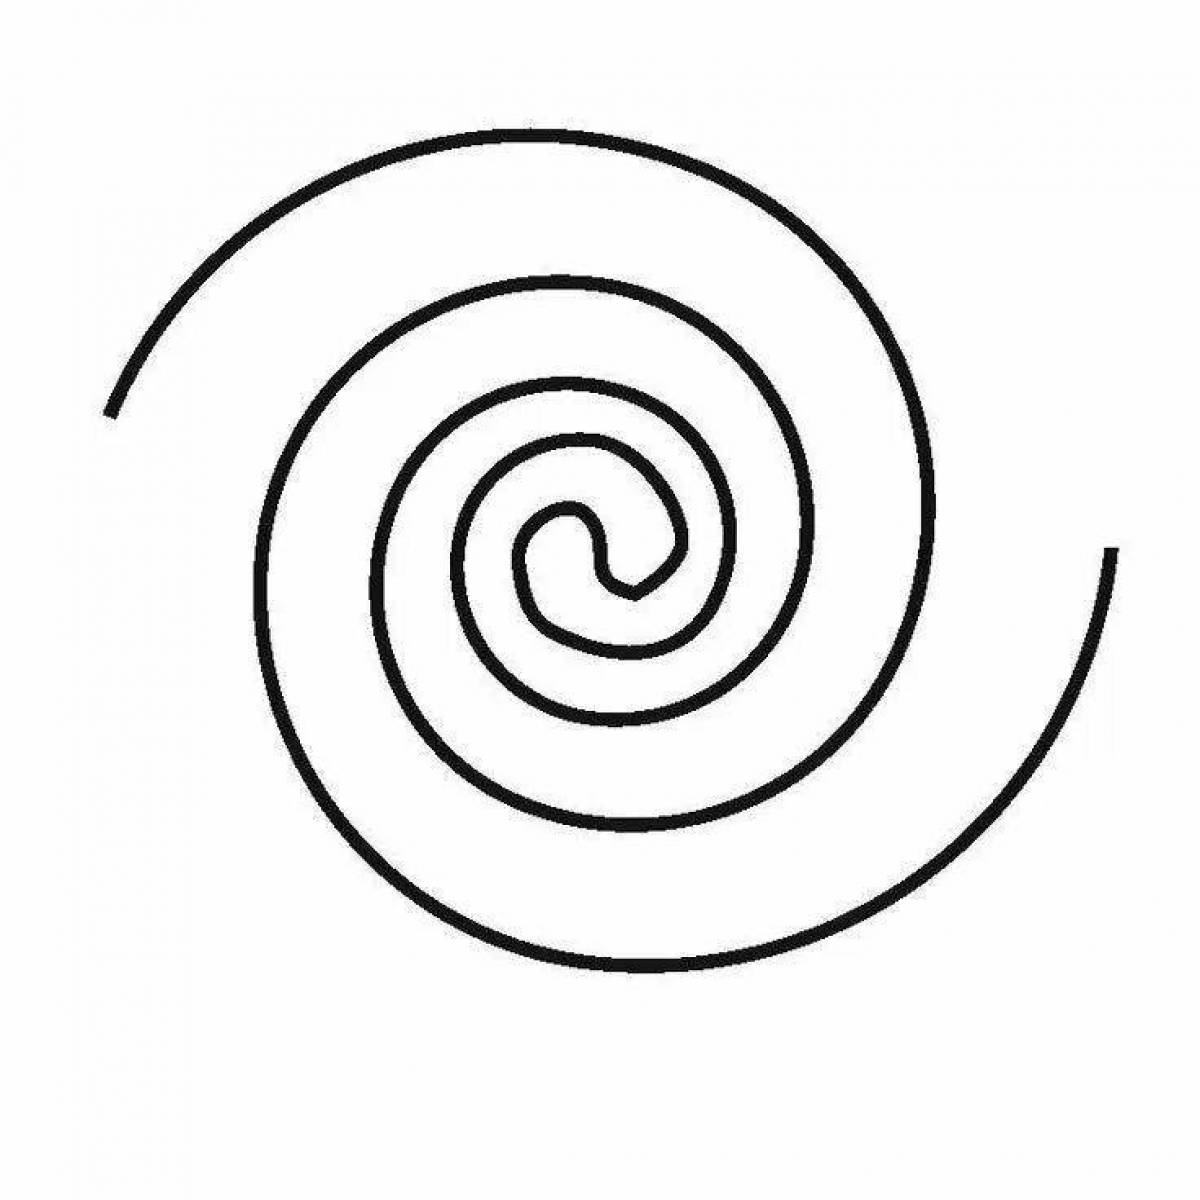 Great coloring spiral pattern